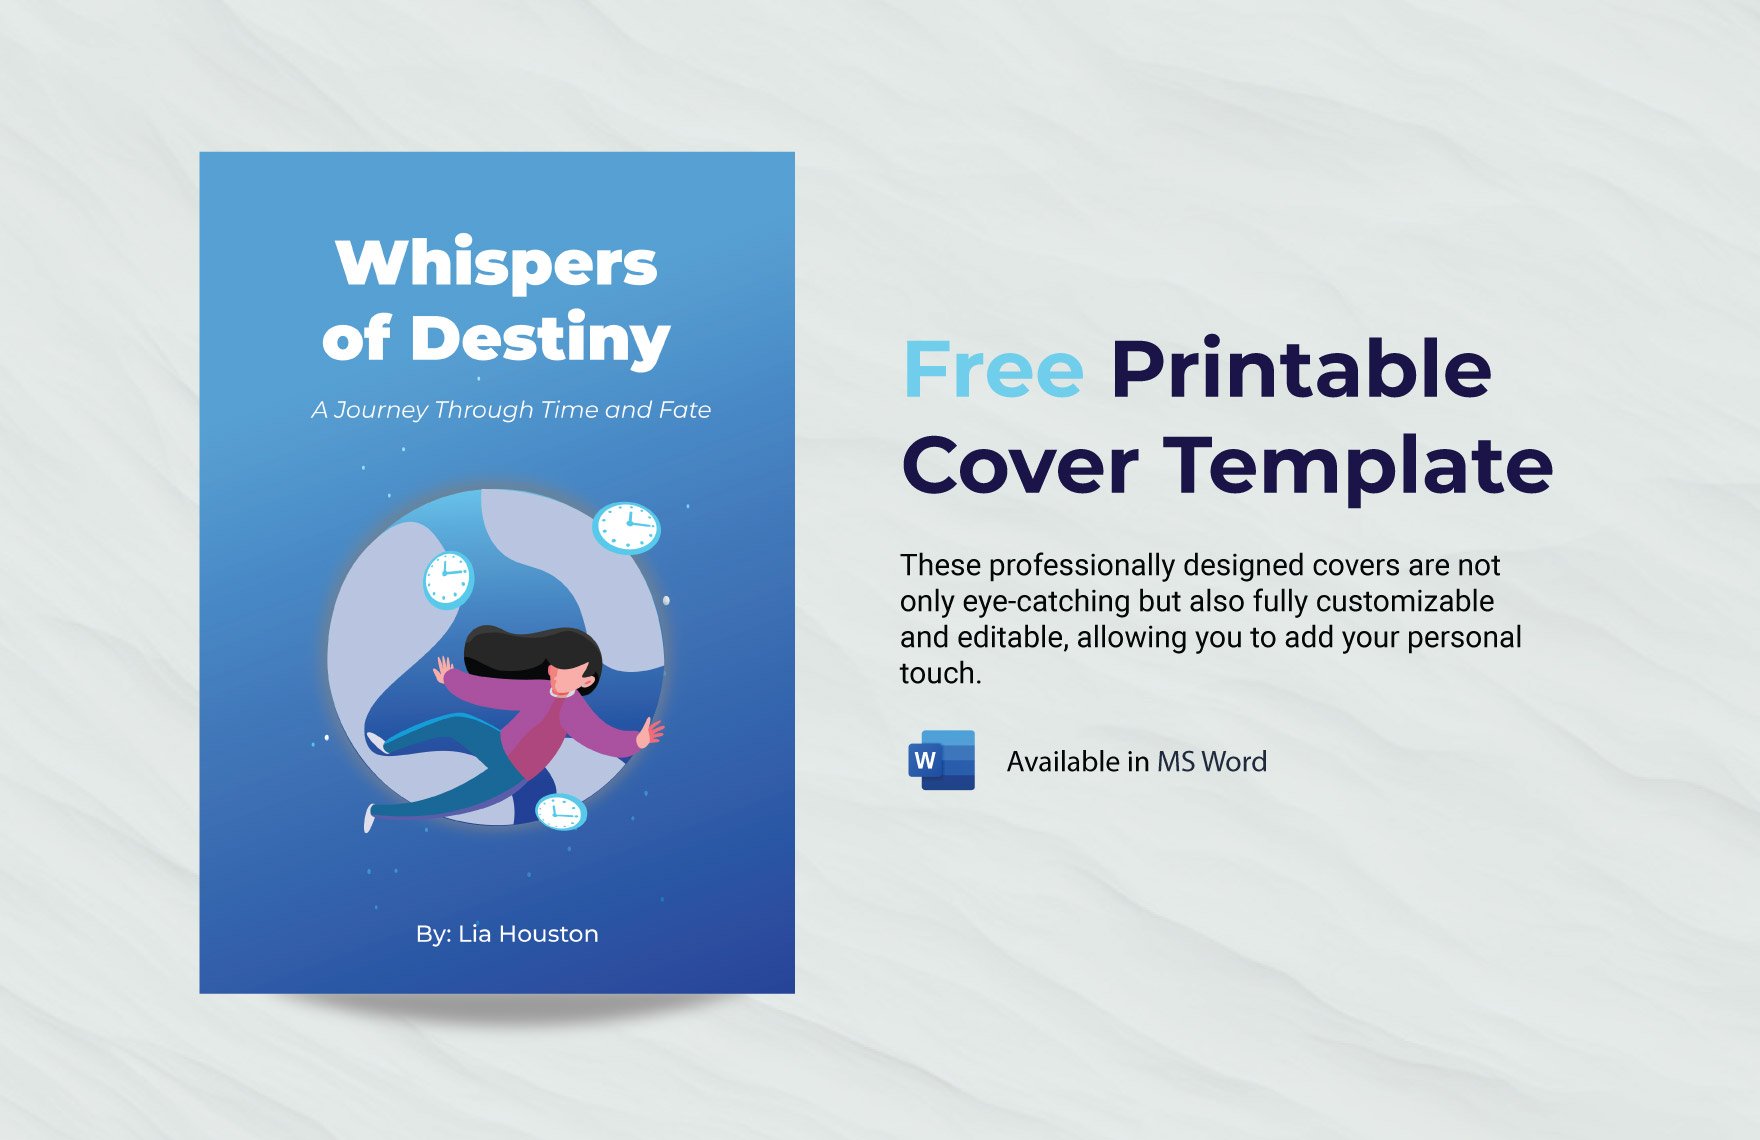 Free Printable Cover Template